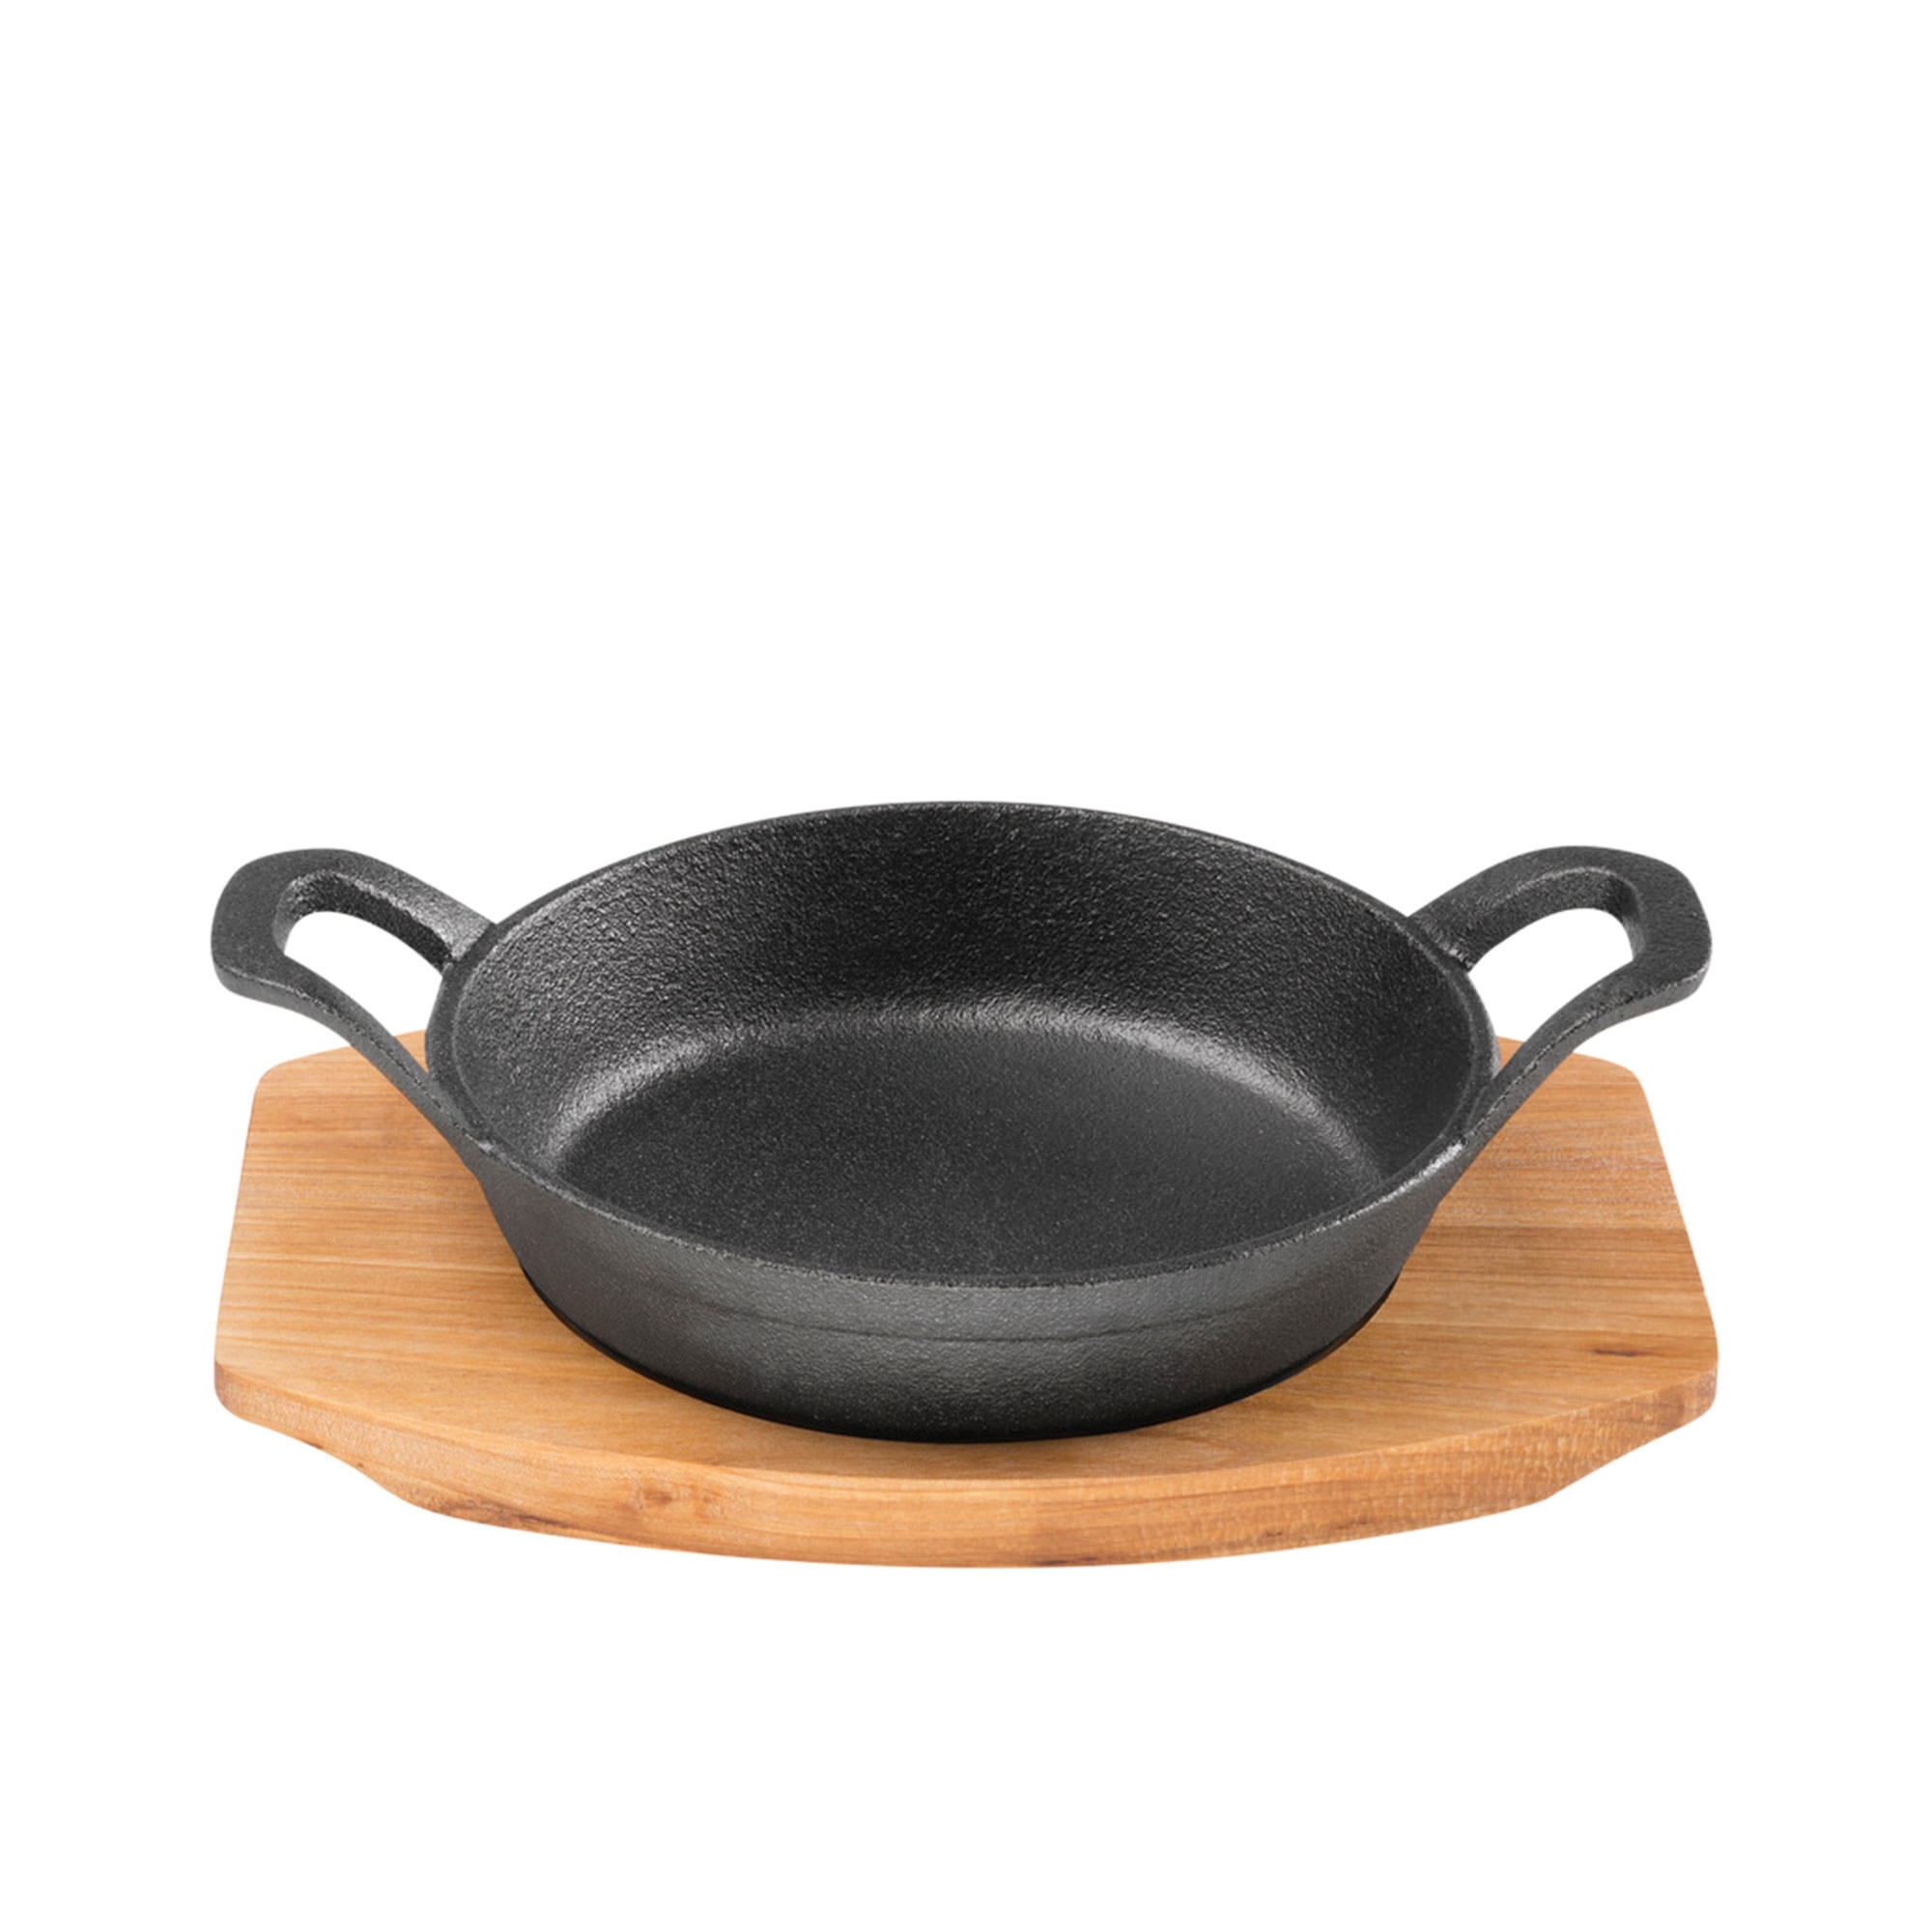 Pyrolux Pyrocast Cast Iron Round Gratin with Maple Tray 15.5cm Image 1